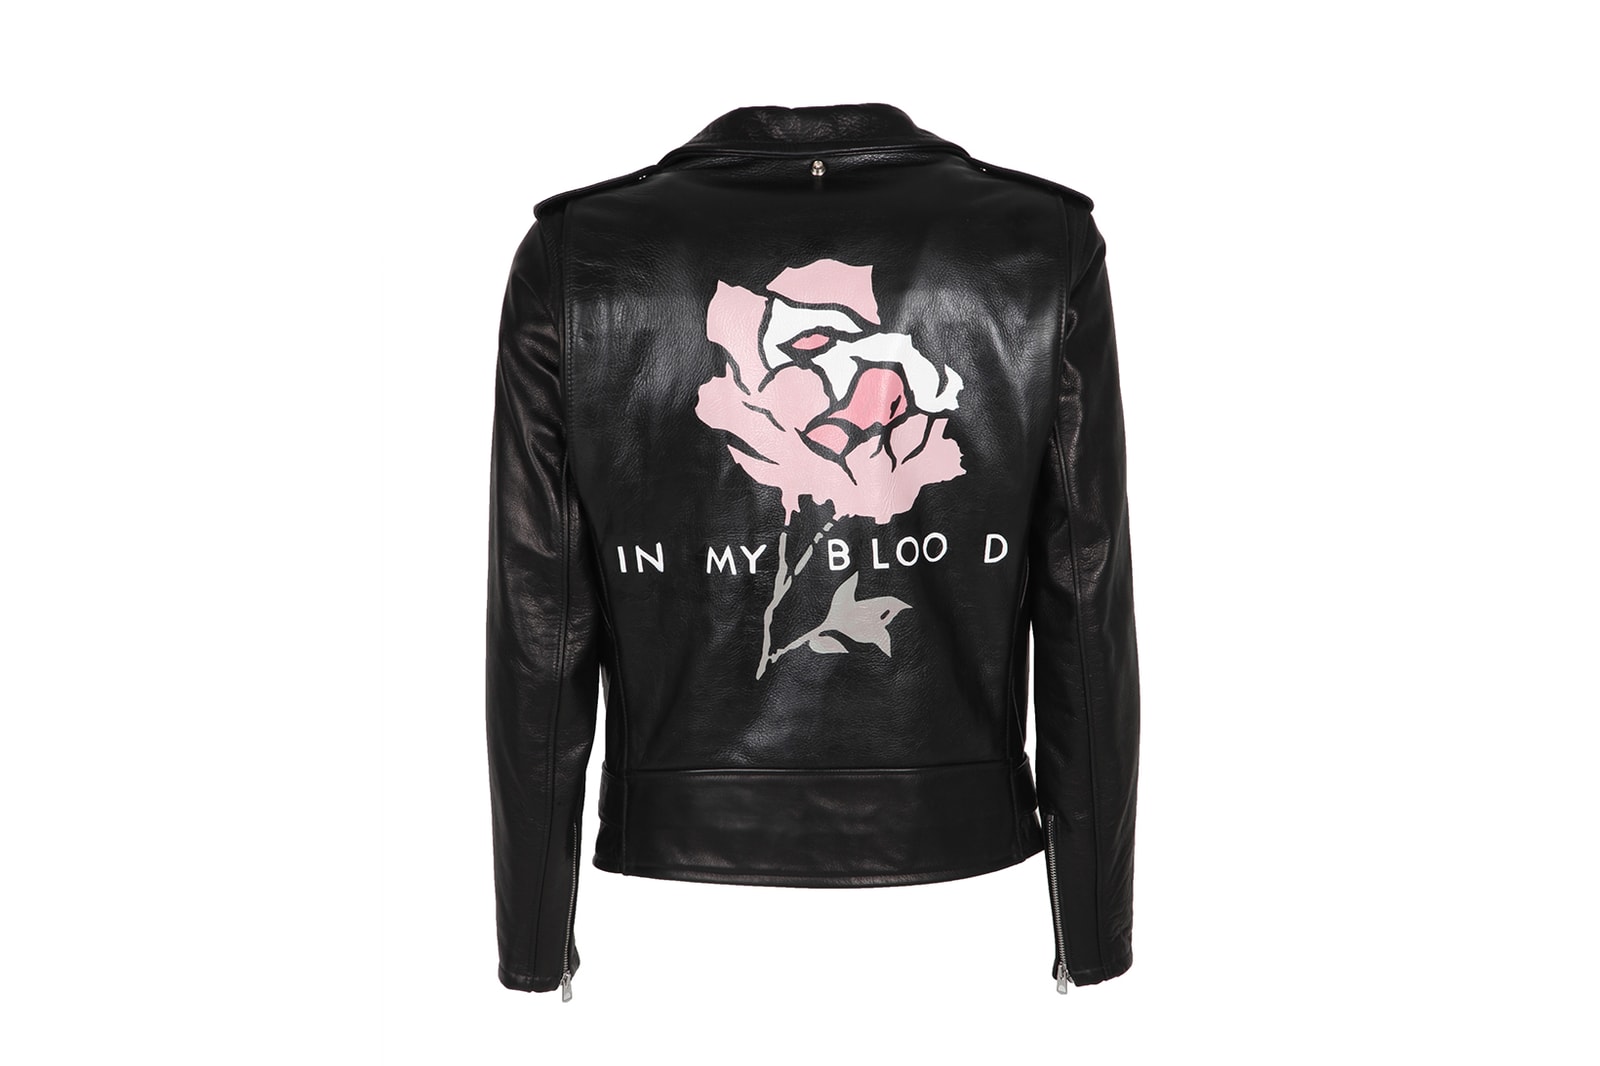 yoox shawn mendes exclusive capsule collection leather jacket sweatshirts tshirts merch in my blood youth nervous lost in japan